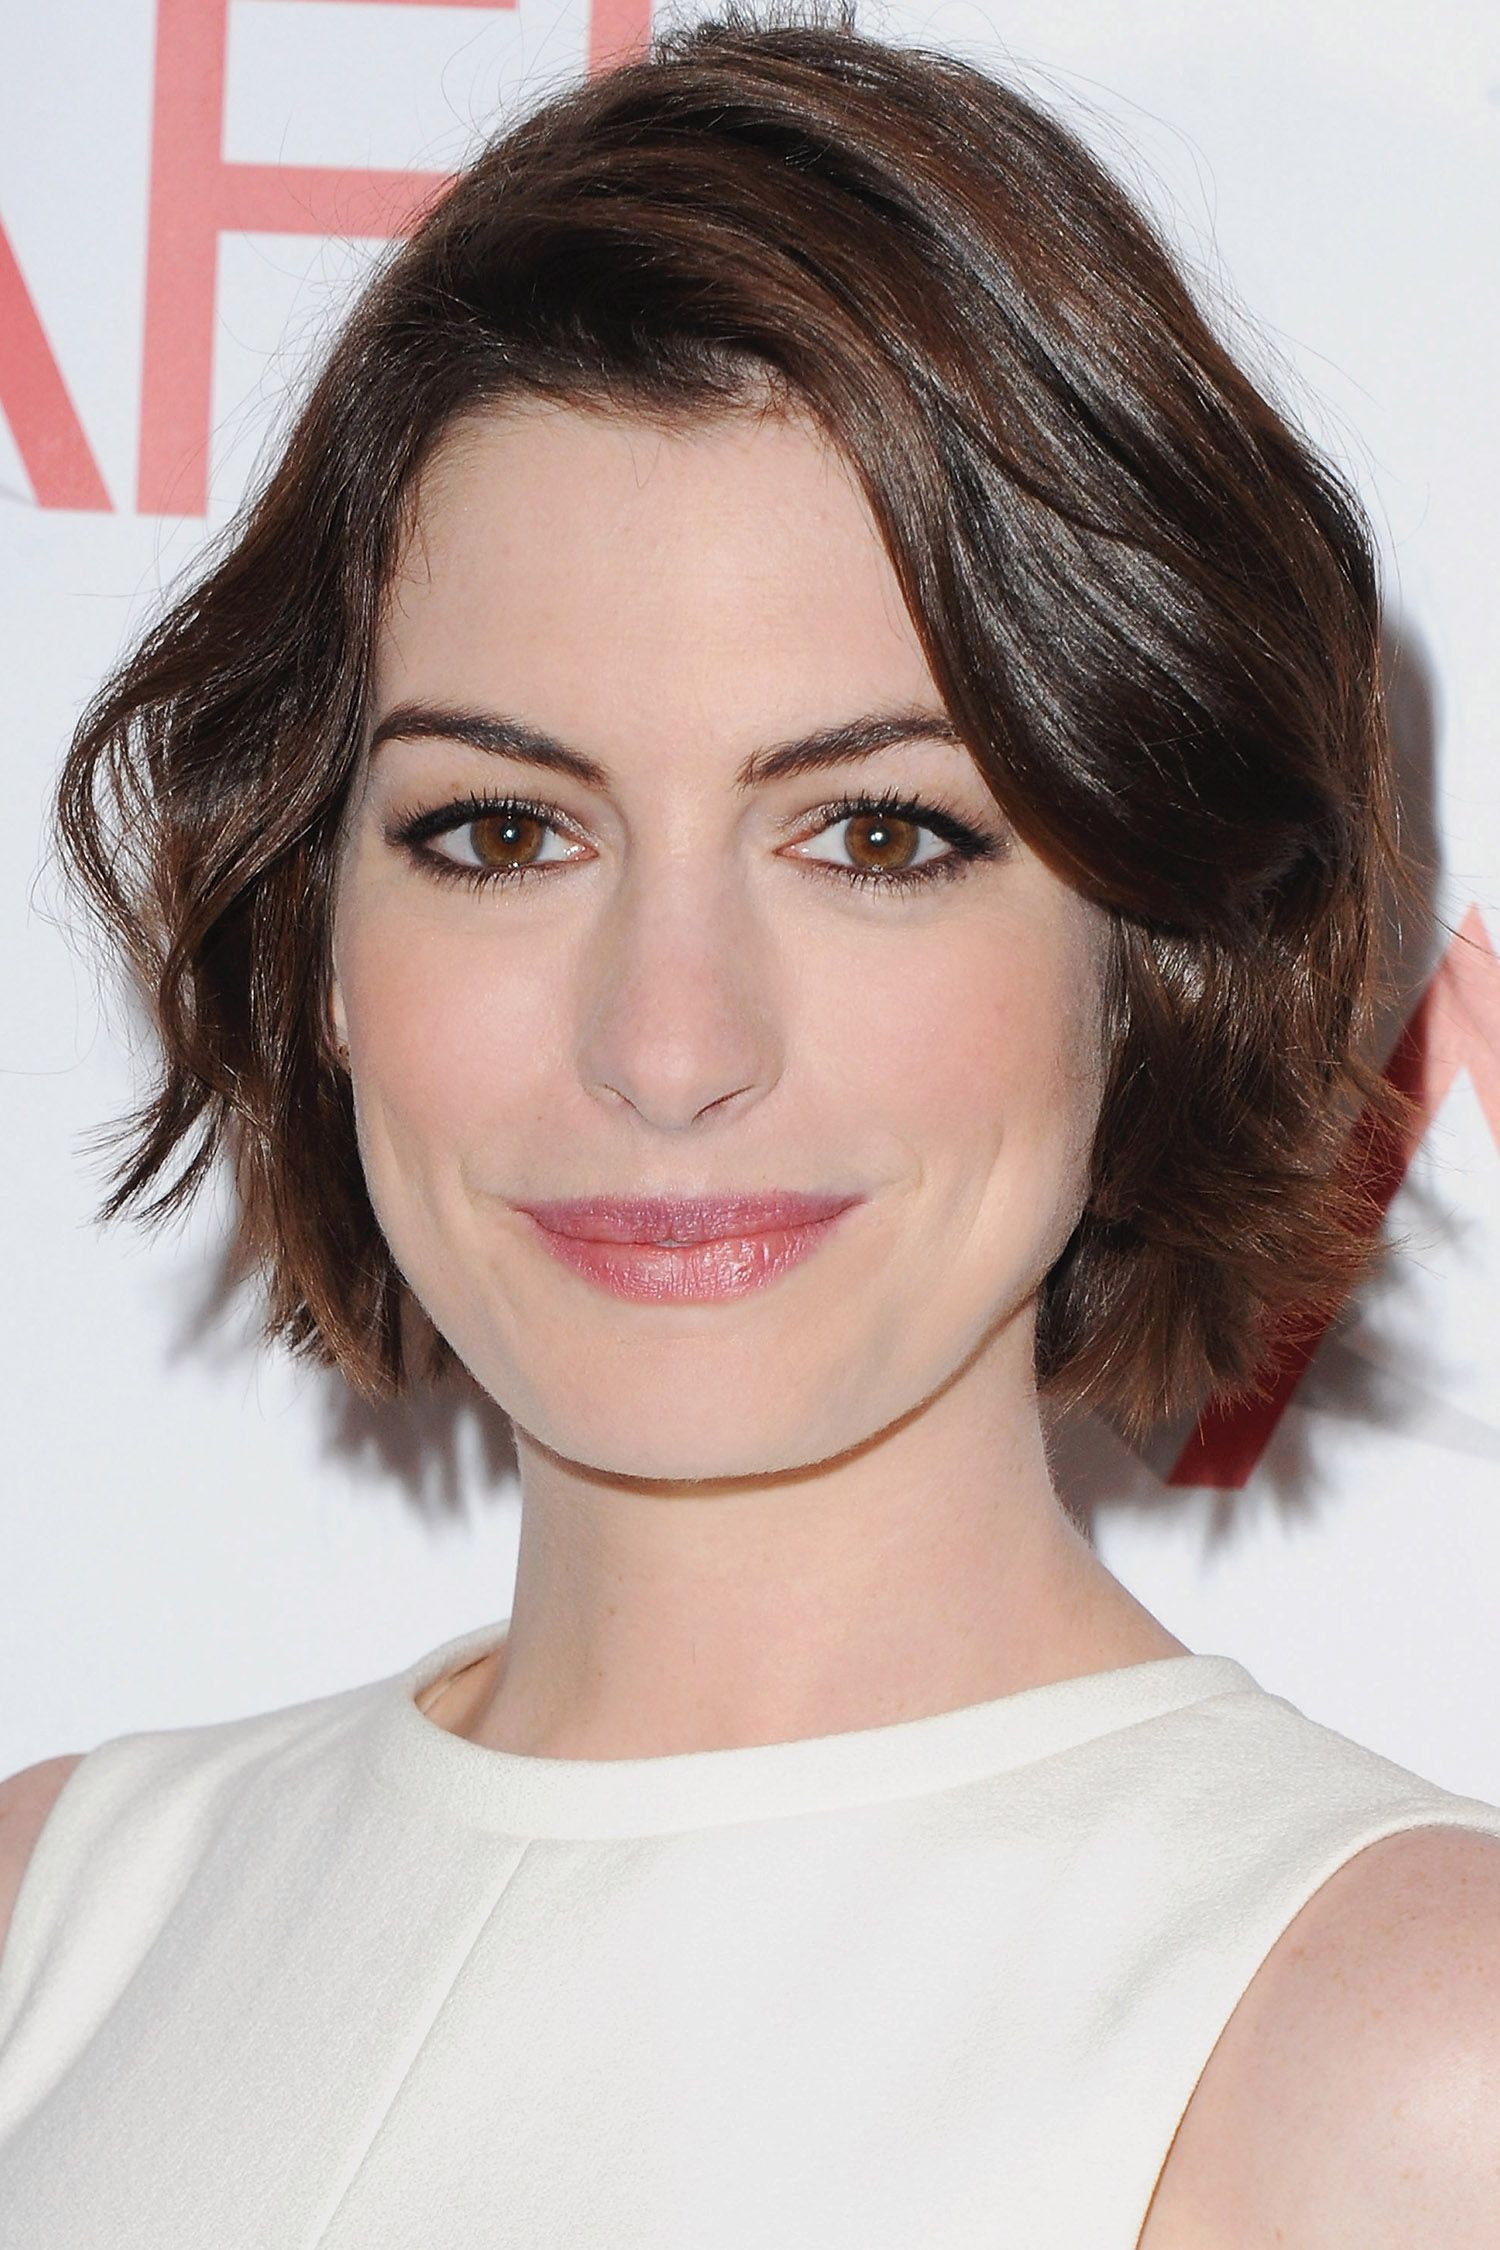 Short Hair, Don't Care: 8 Celebs Who Chopped It Off In 2013